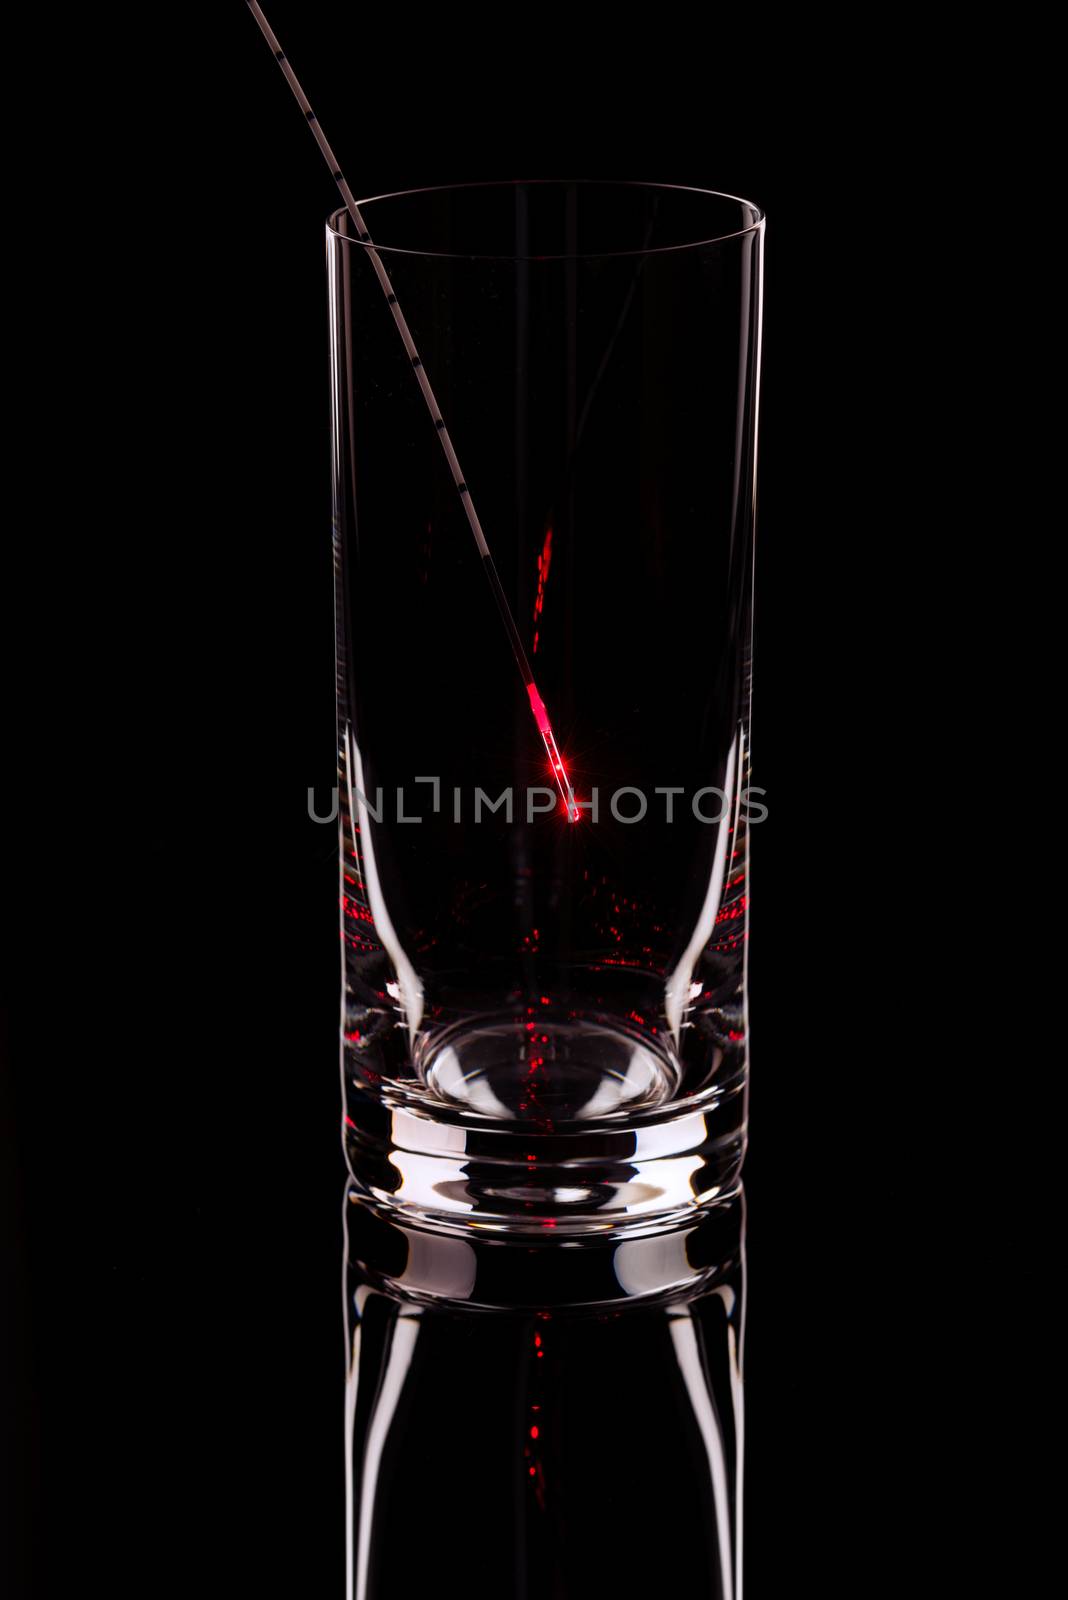 The shining probe in an glass on a black background by fotooxotnik